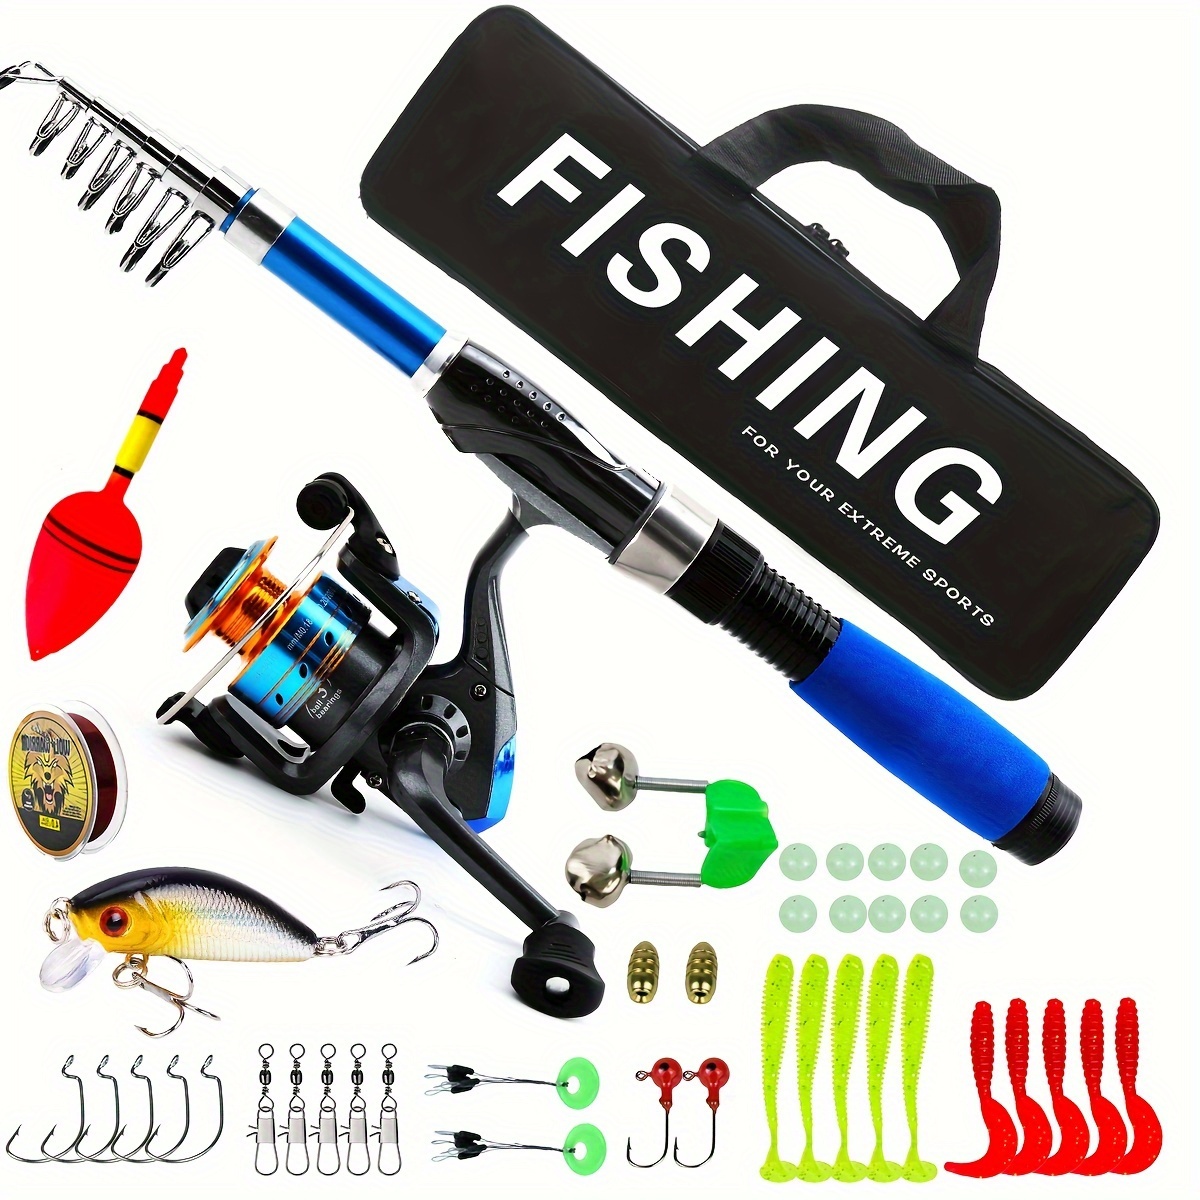 Travel Telescopic Fishing Tackle Combo Kit, Including 1.7m/5.5ft Feeder  Rod, Spinning Reel, Fishing Line, Soft Hard Bait And More Accessories,  Suitabl